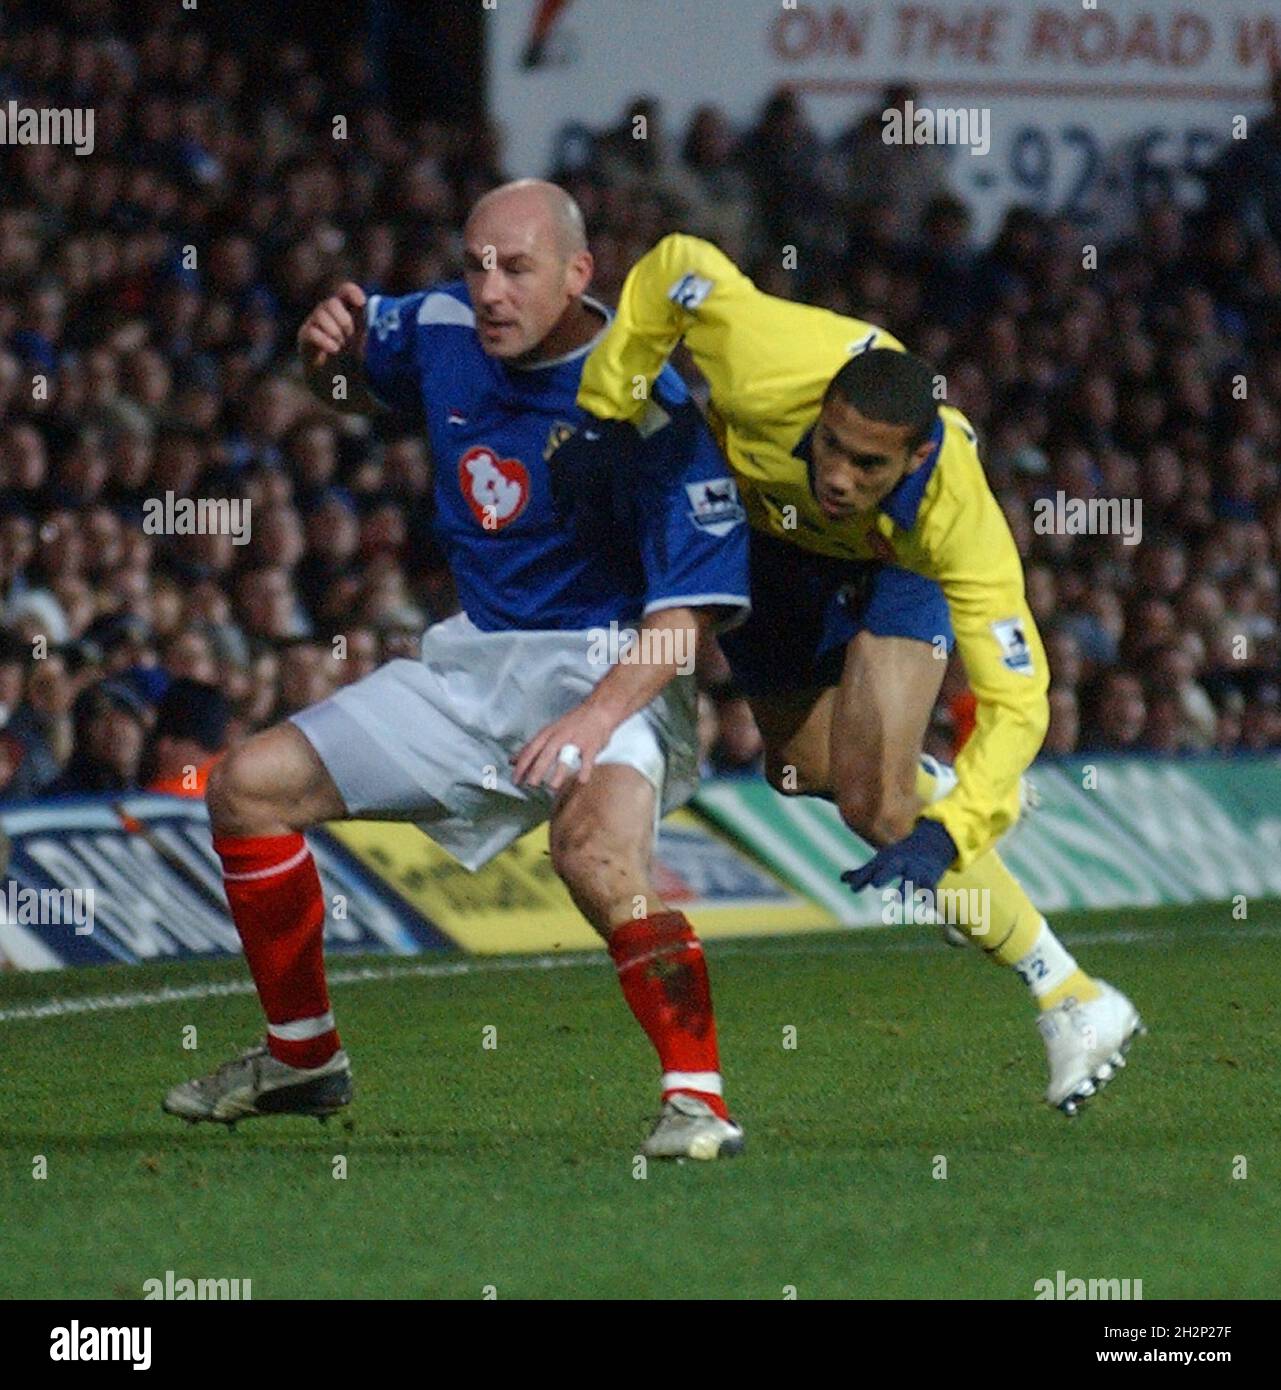 portsmouth v arsenal 2004 STEVE STONE TANGLES WITH VAN PERSIE pic mike walker, 2004 Stock Photo